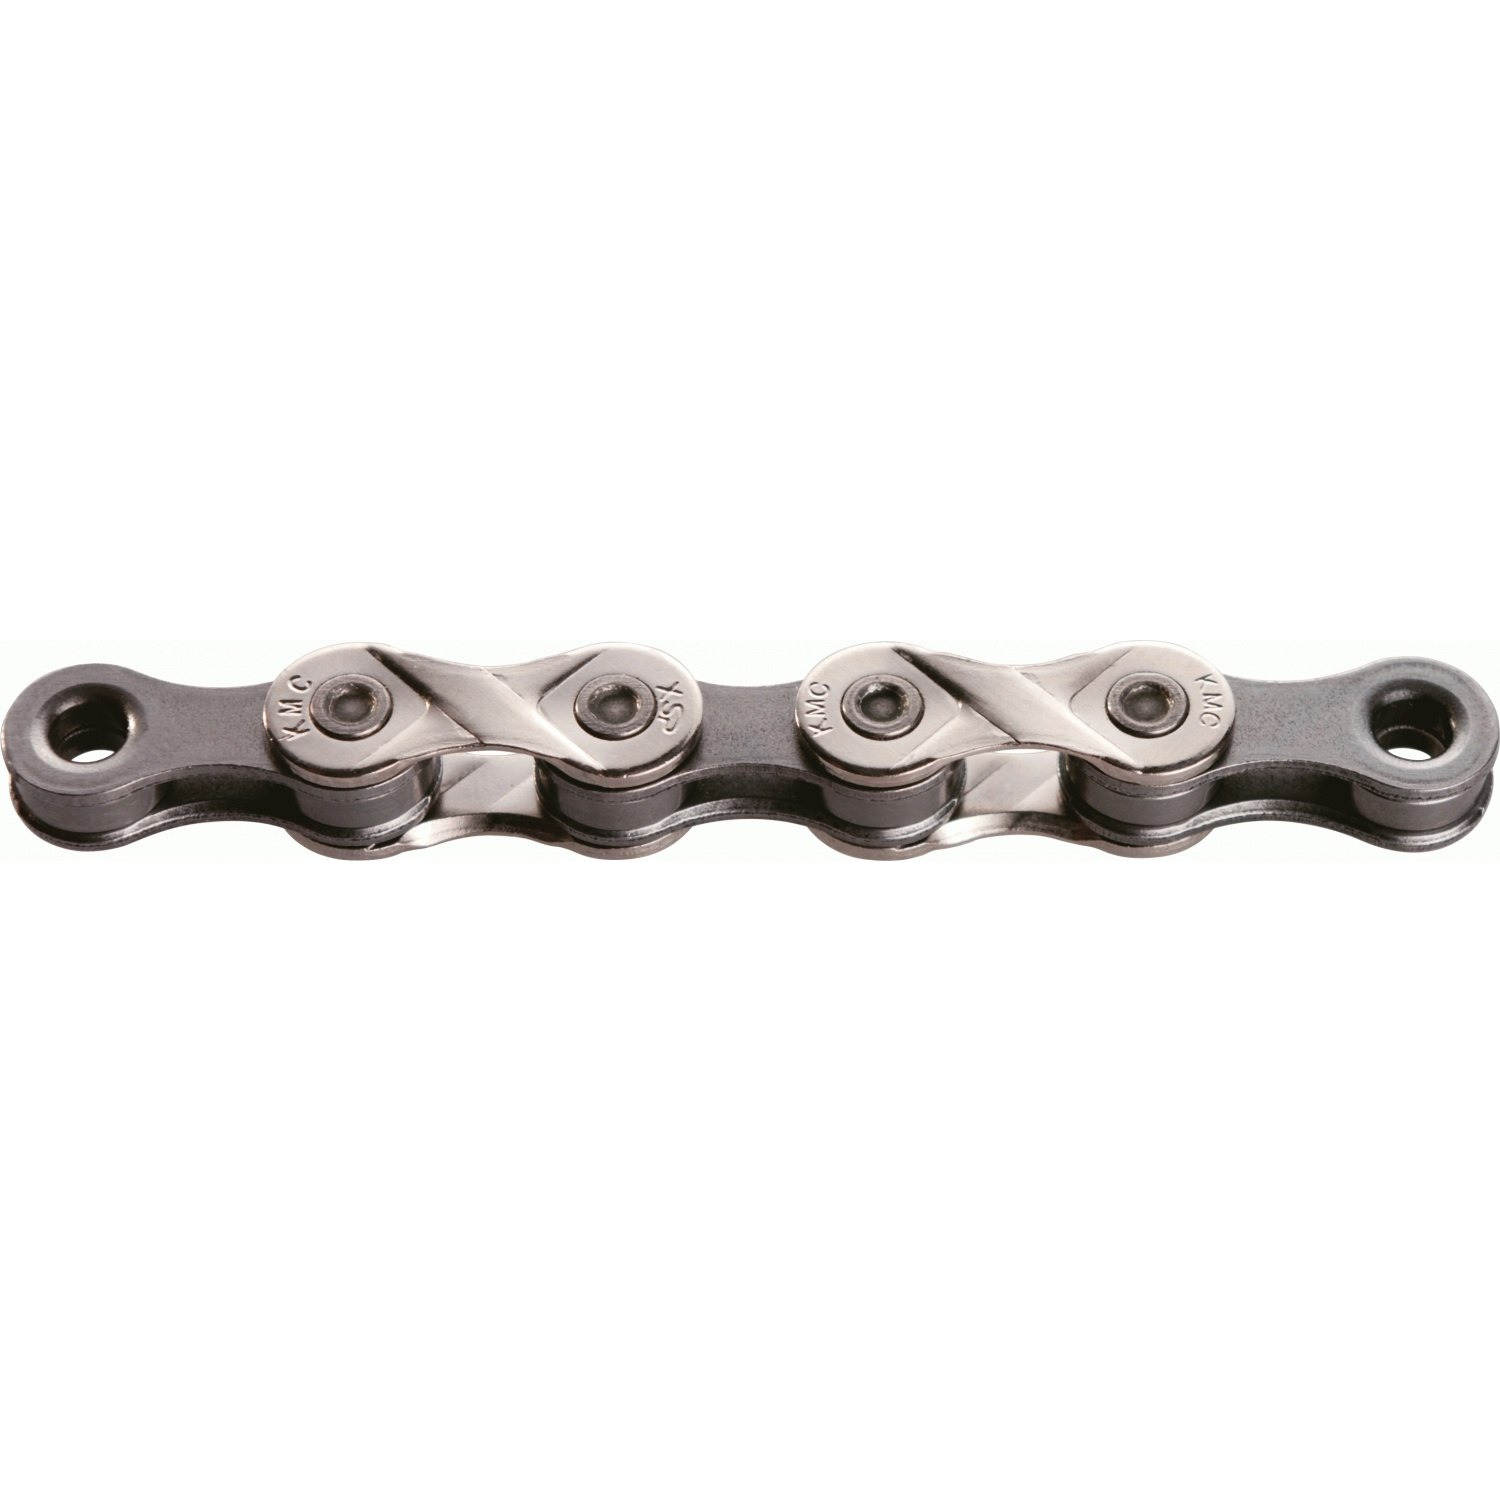 Picture of KMC e8 EPT Chain - 7/8-speed - 122 links